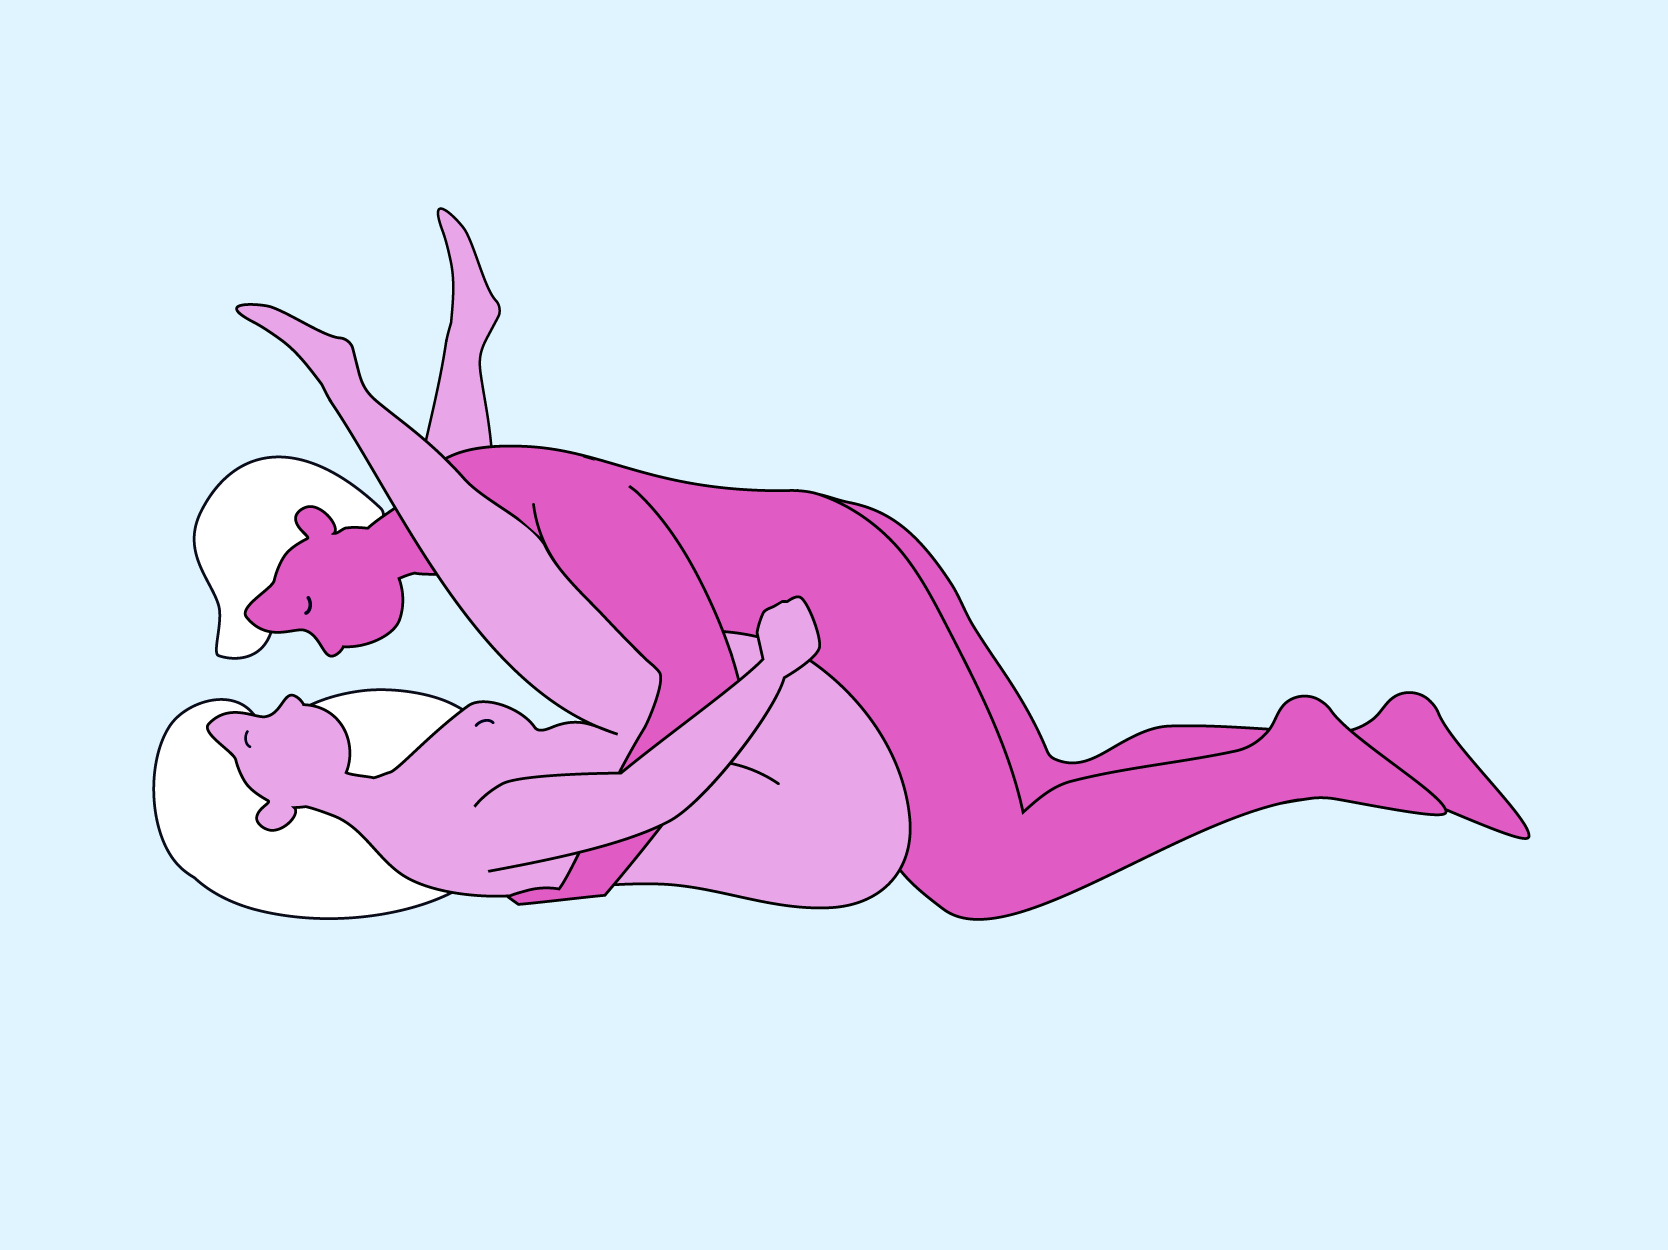 25 toe-curling sex positions to help you get out of a rut, recommended by sex therapists